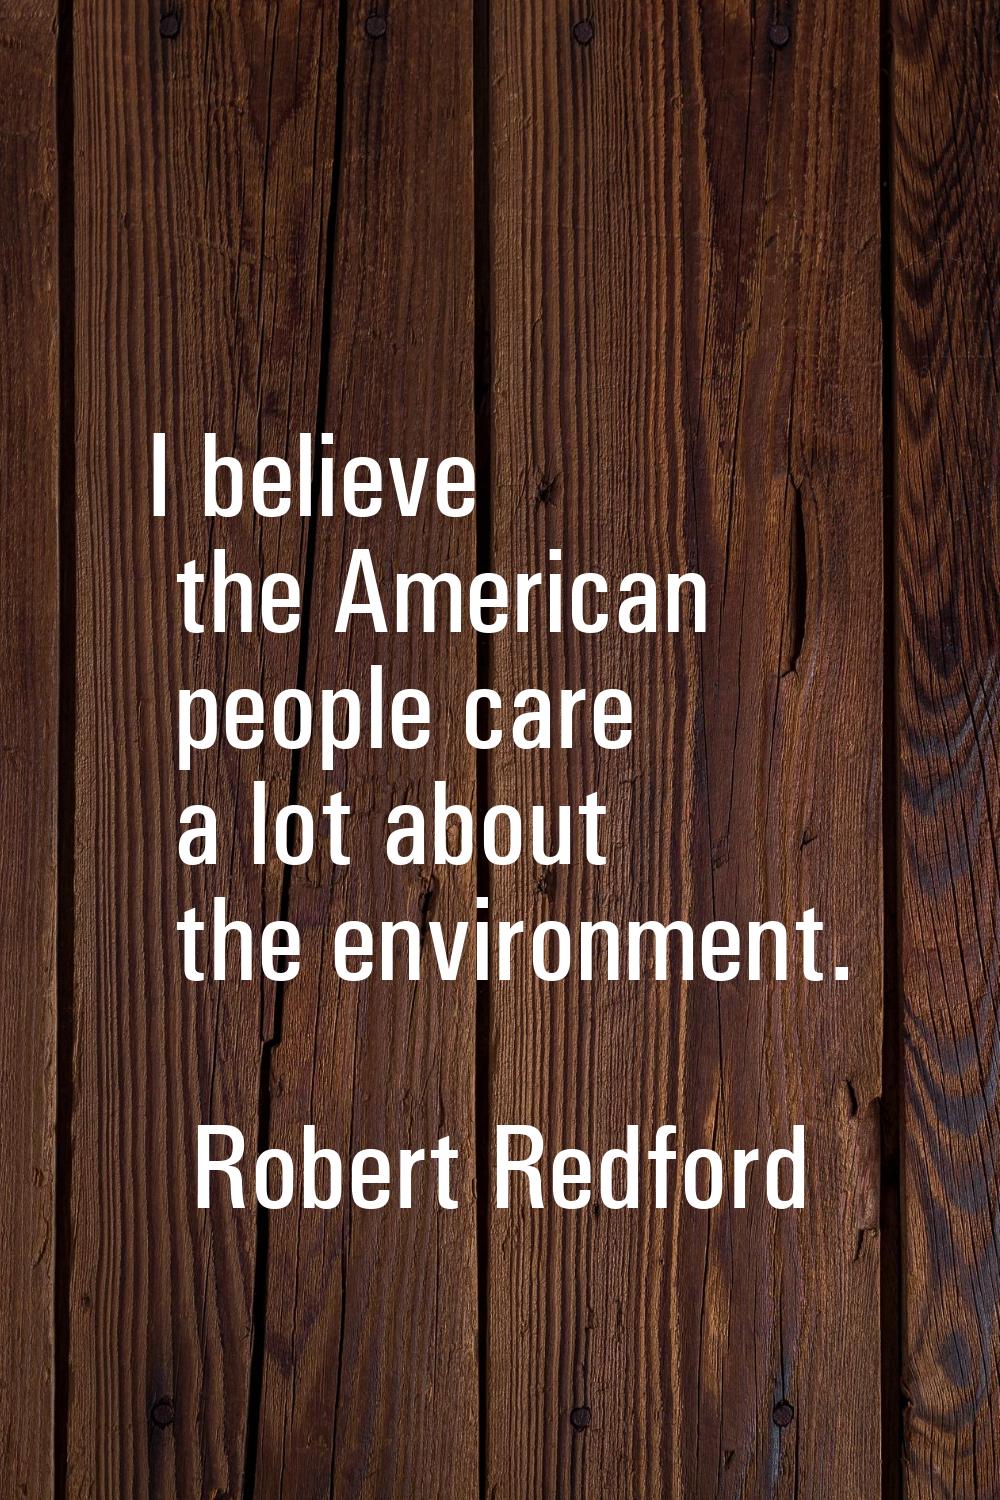 I believe the American people care a lot about the environment.